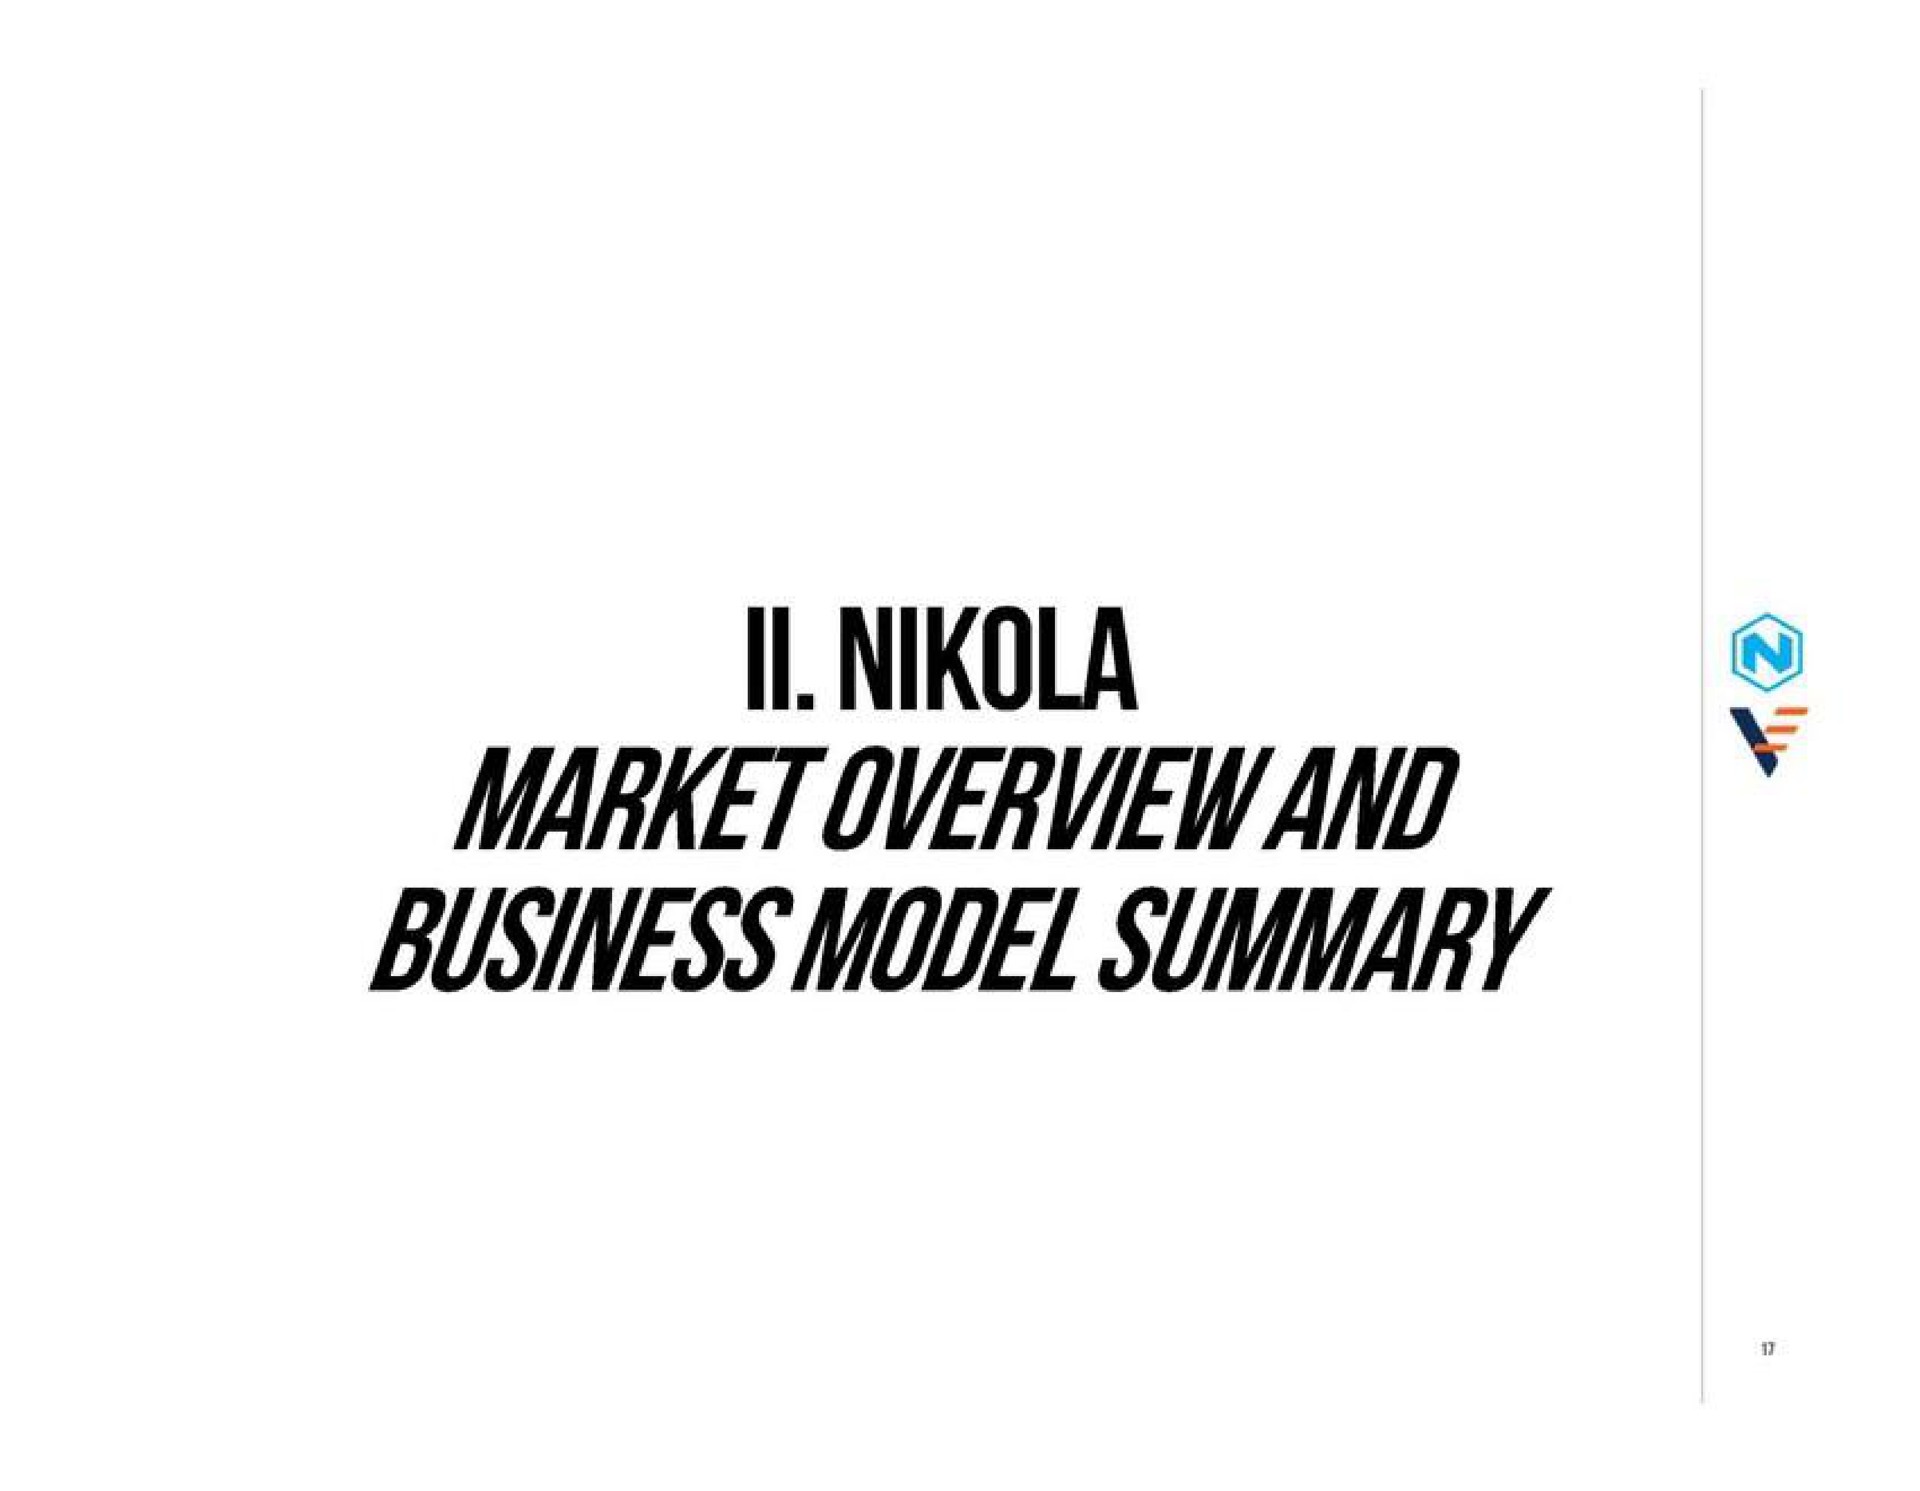 market overview and business model summary | Nikola